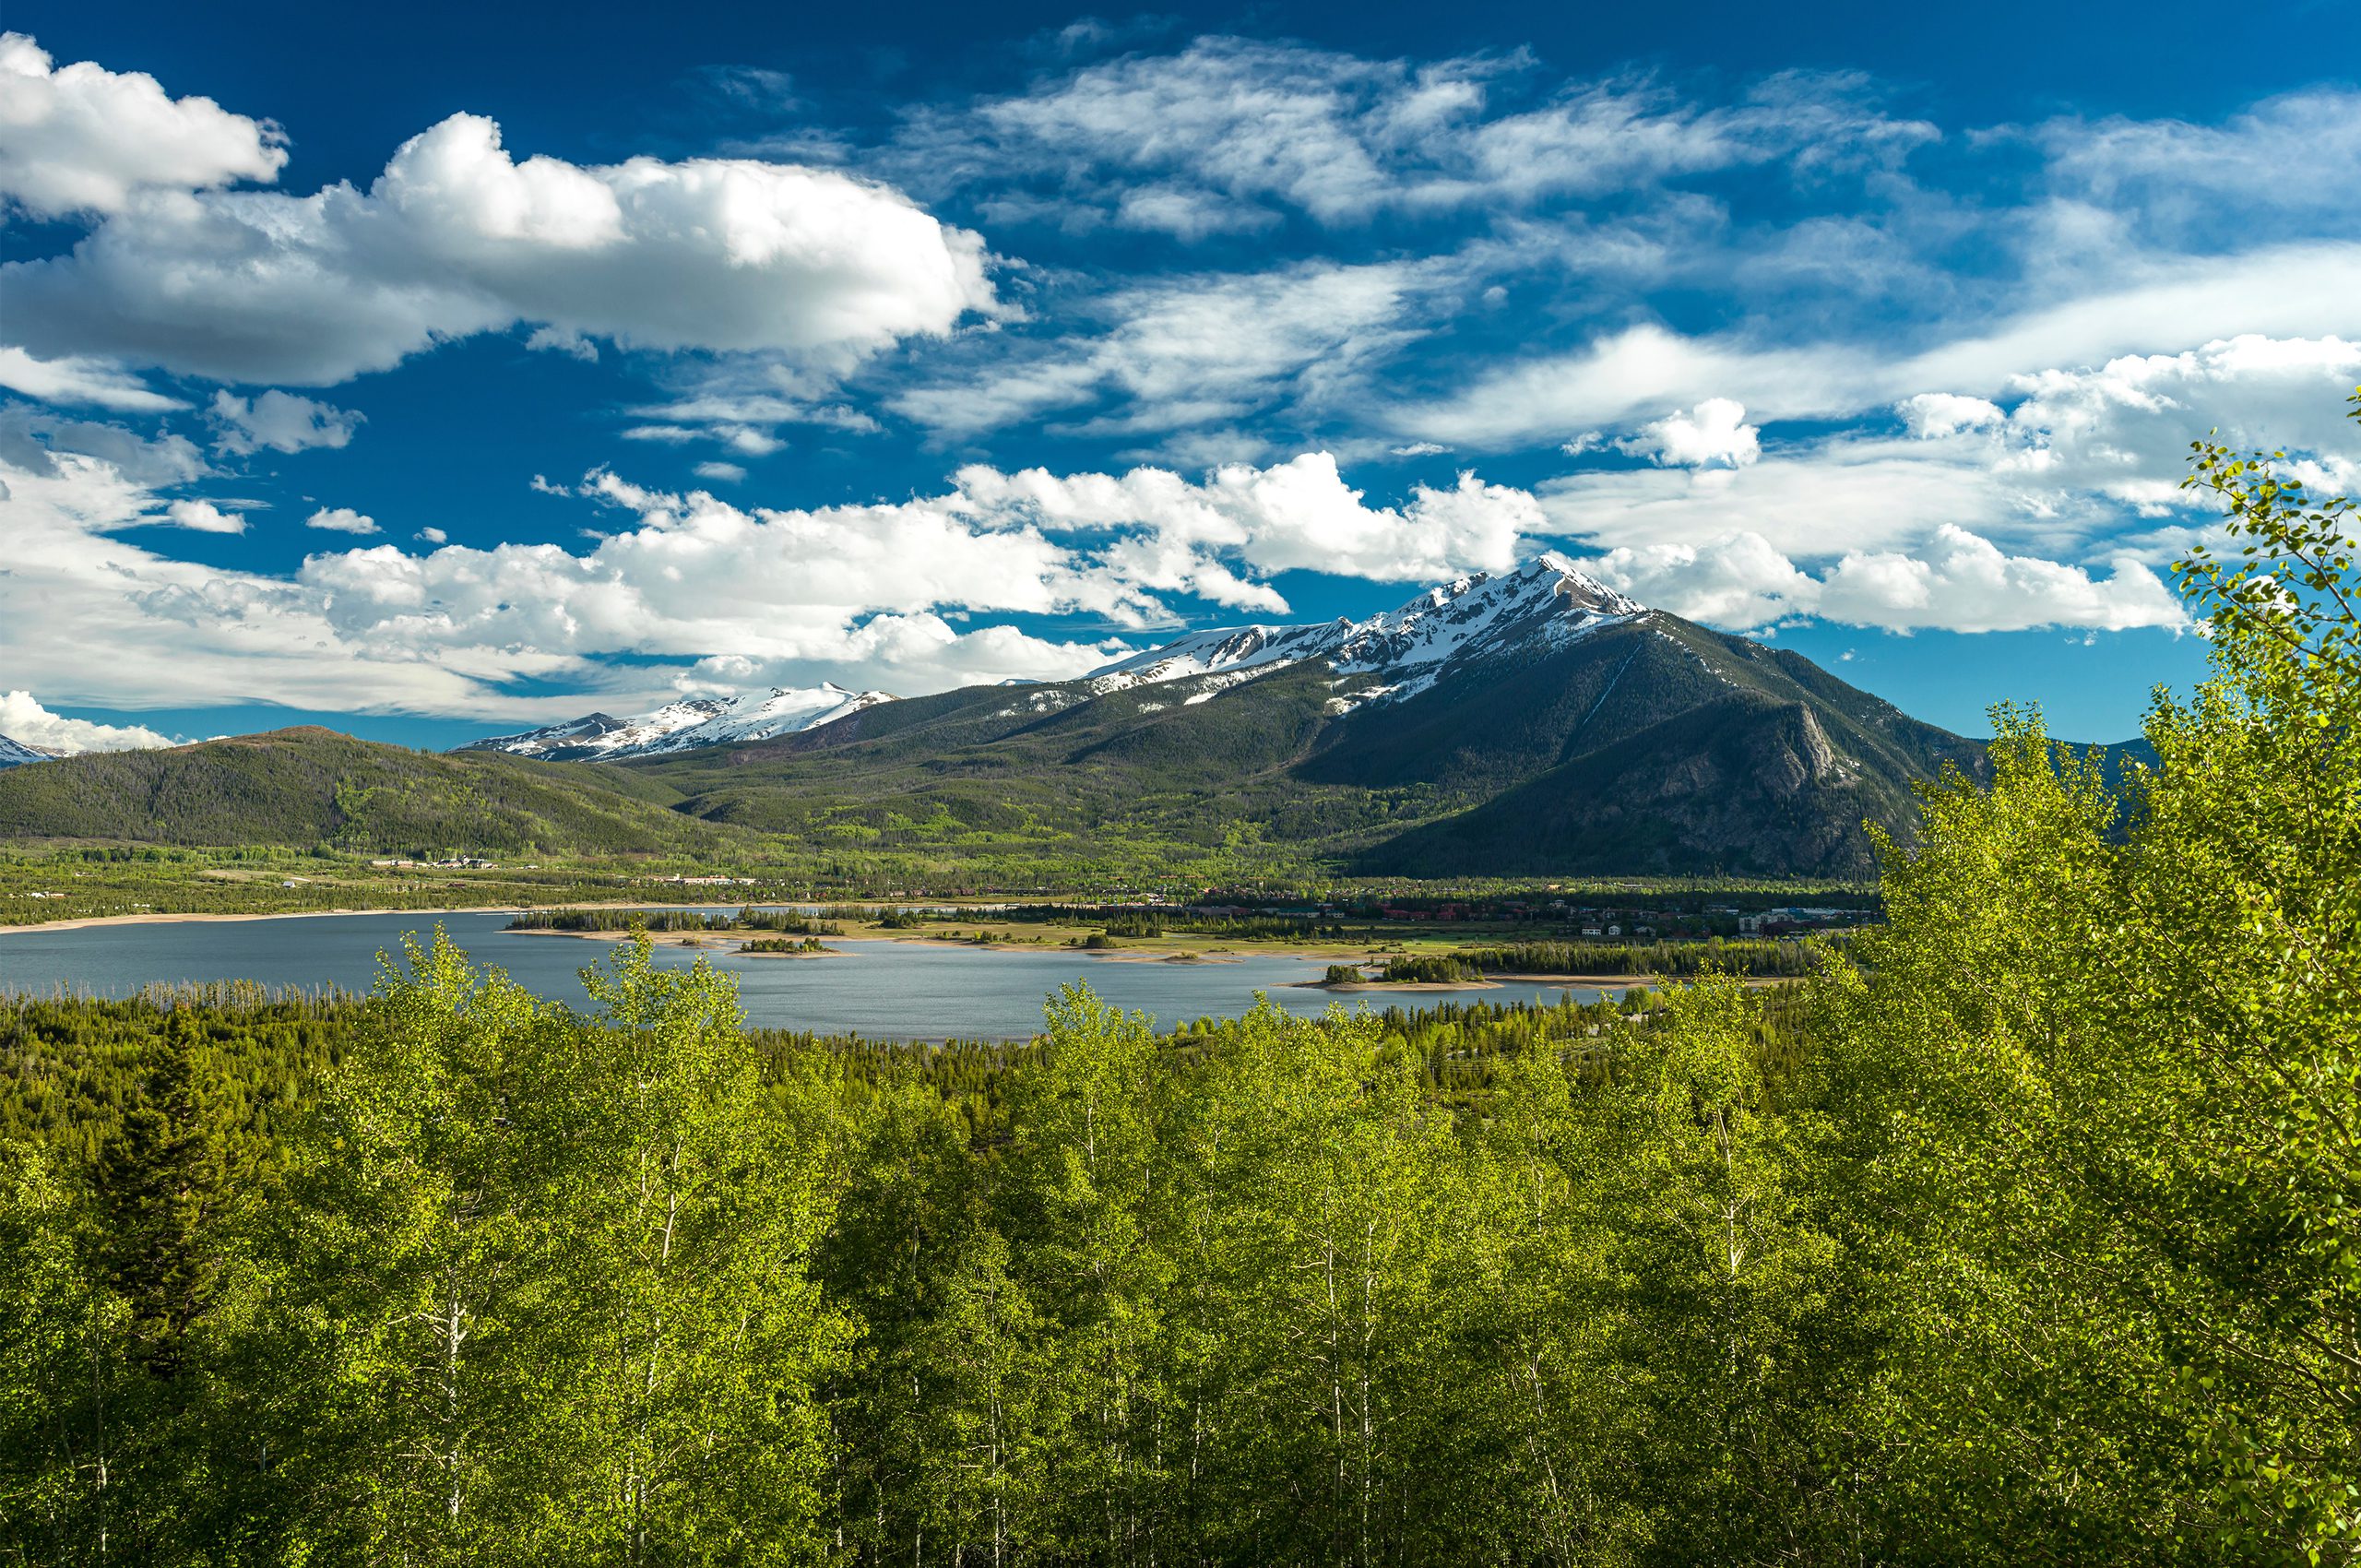 View of Peak One with snow and Dillon Reservoir in spring